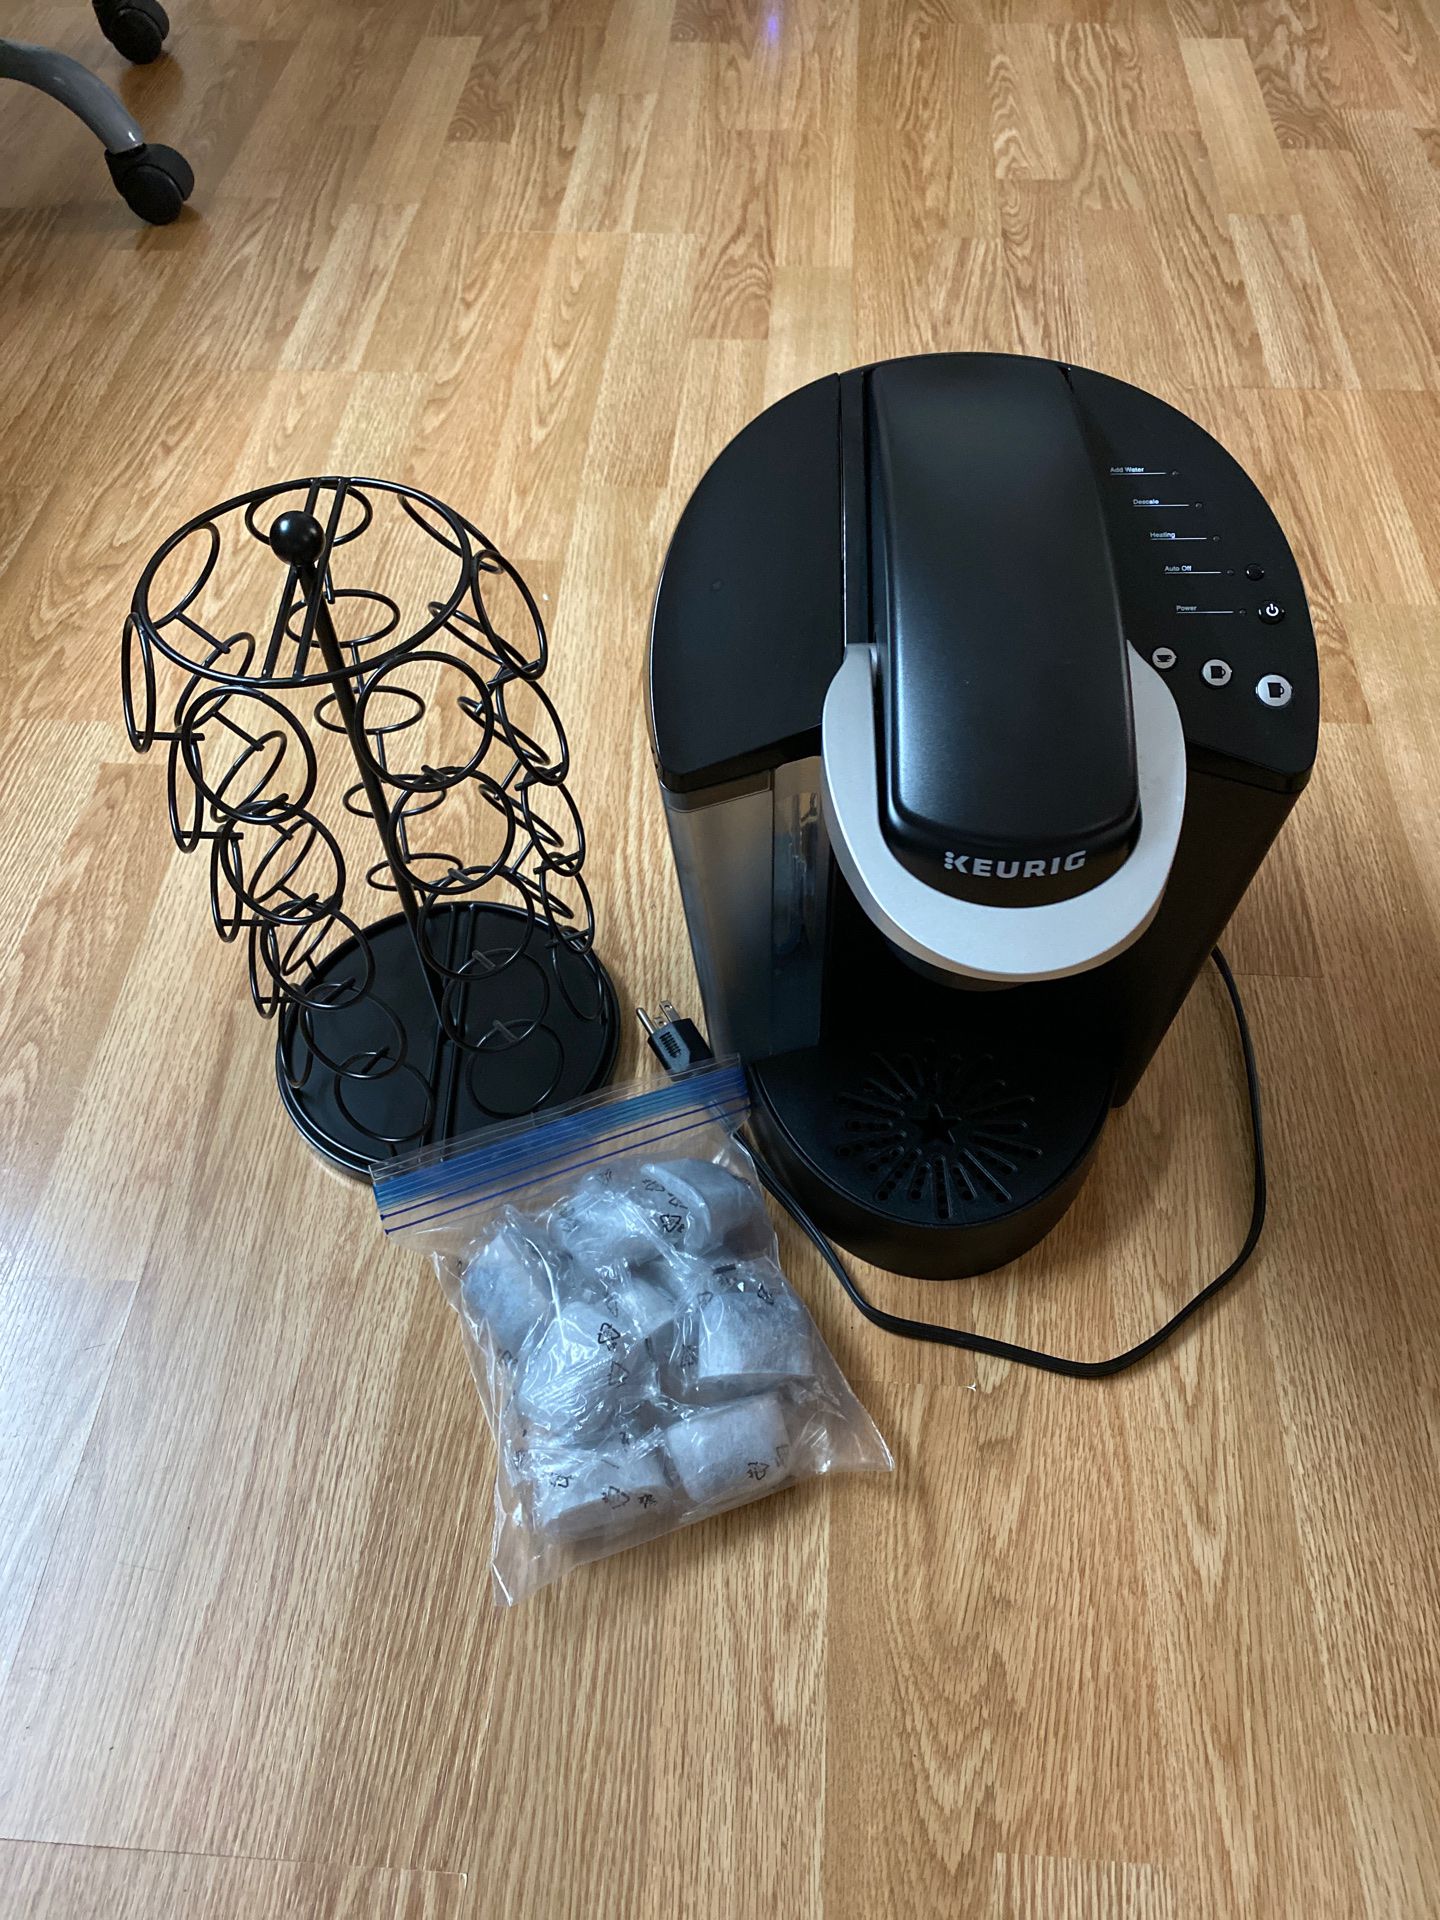 Keurig coffee maker and kits good condition